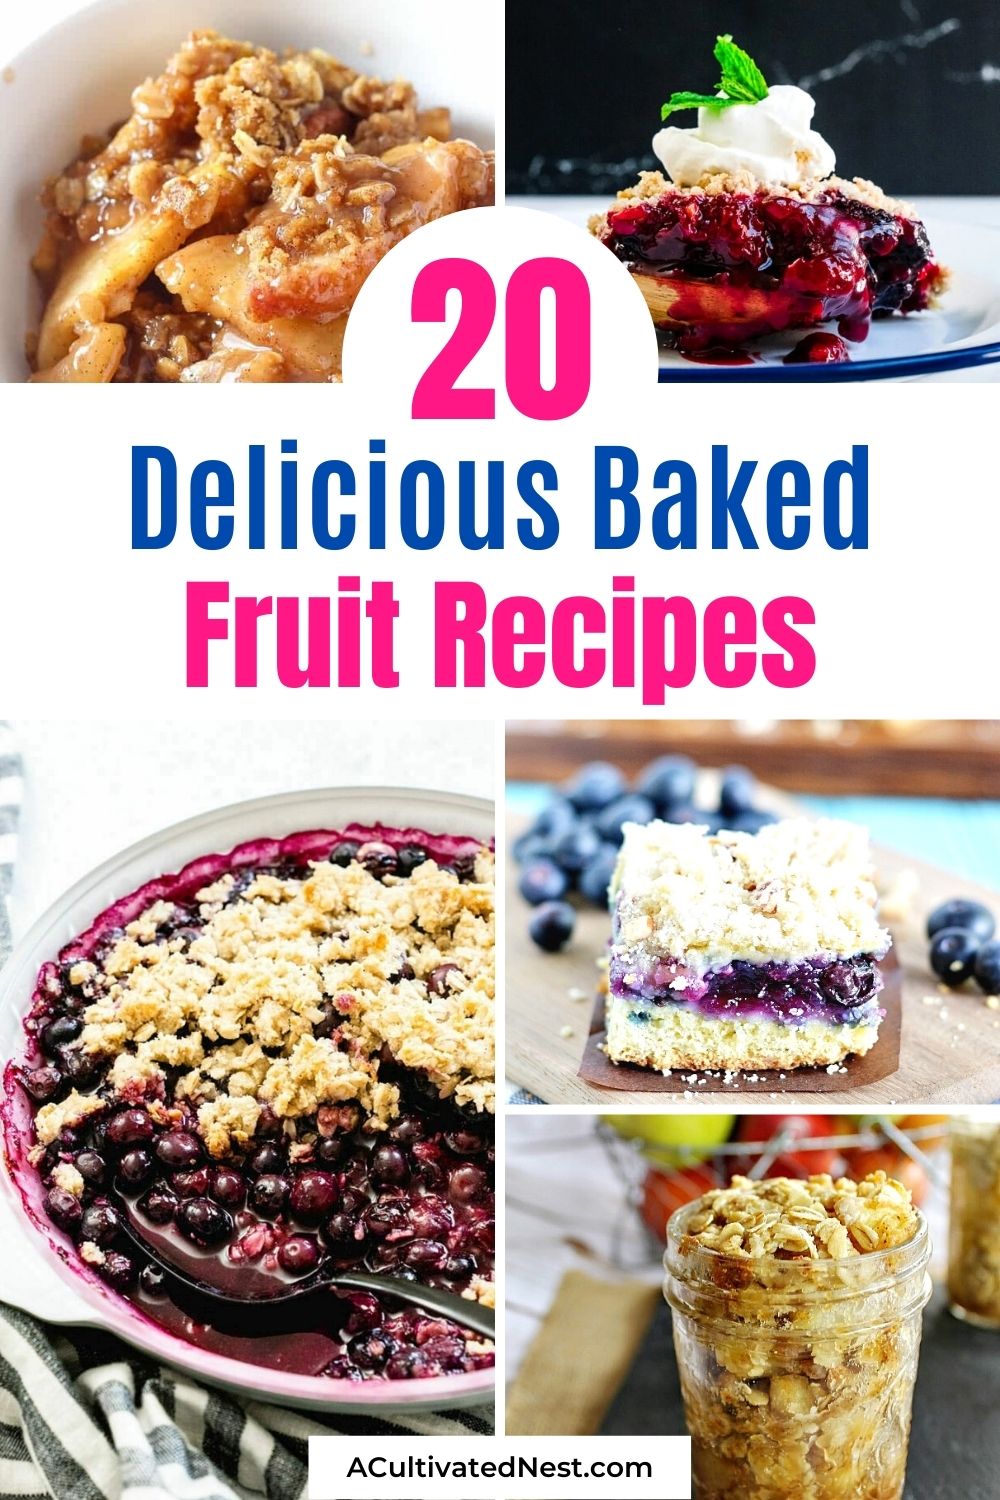 20 Tasty Baked Fruit Recipes- If you want a delicious way to eat some fruit, check out all the tasty baked fruit recipes you can try! Apple, berries, and more make up these delicious crumbles, cobbles, and other recipes! | ways to use up fruit #baking #fruit #recipes #bakedFruit #ACultivatedNest